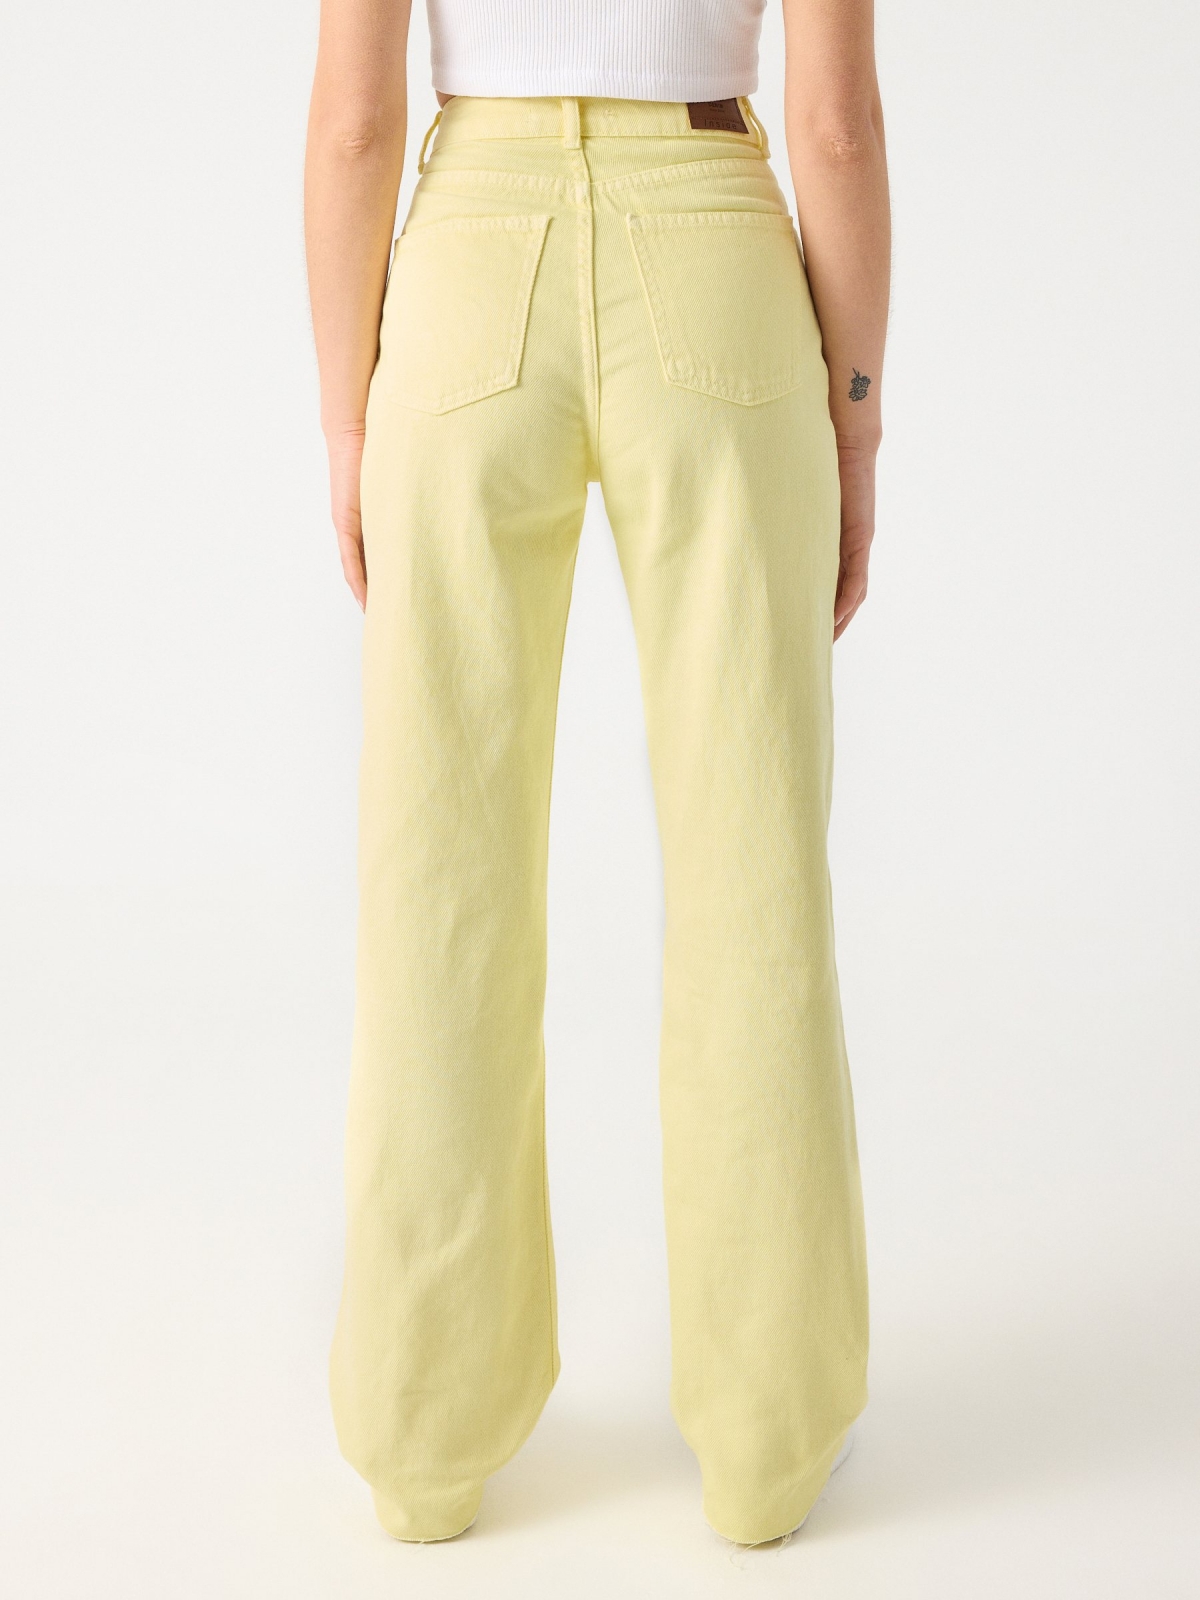 Wide-leg five-pocket jeans light yellow middle back view